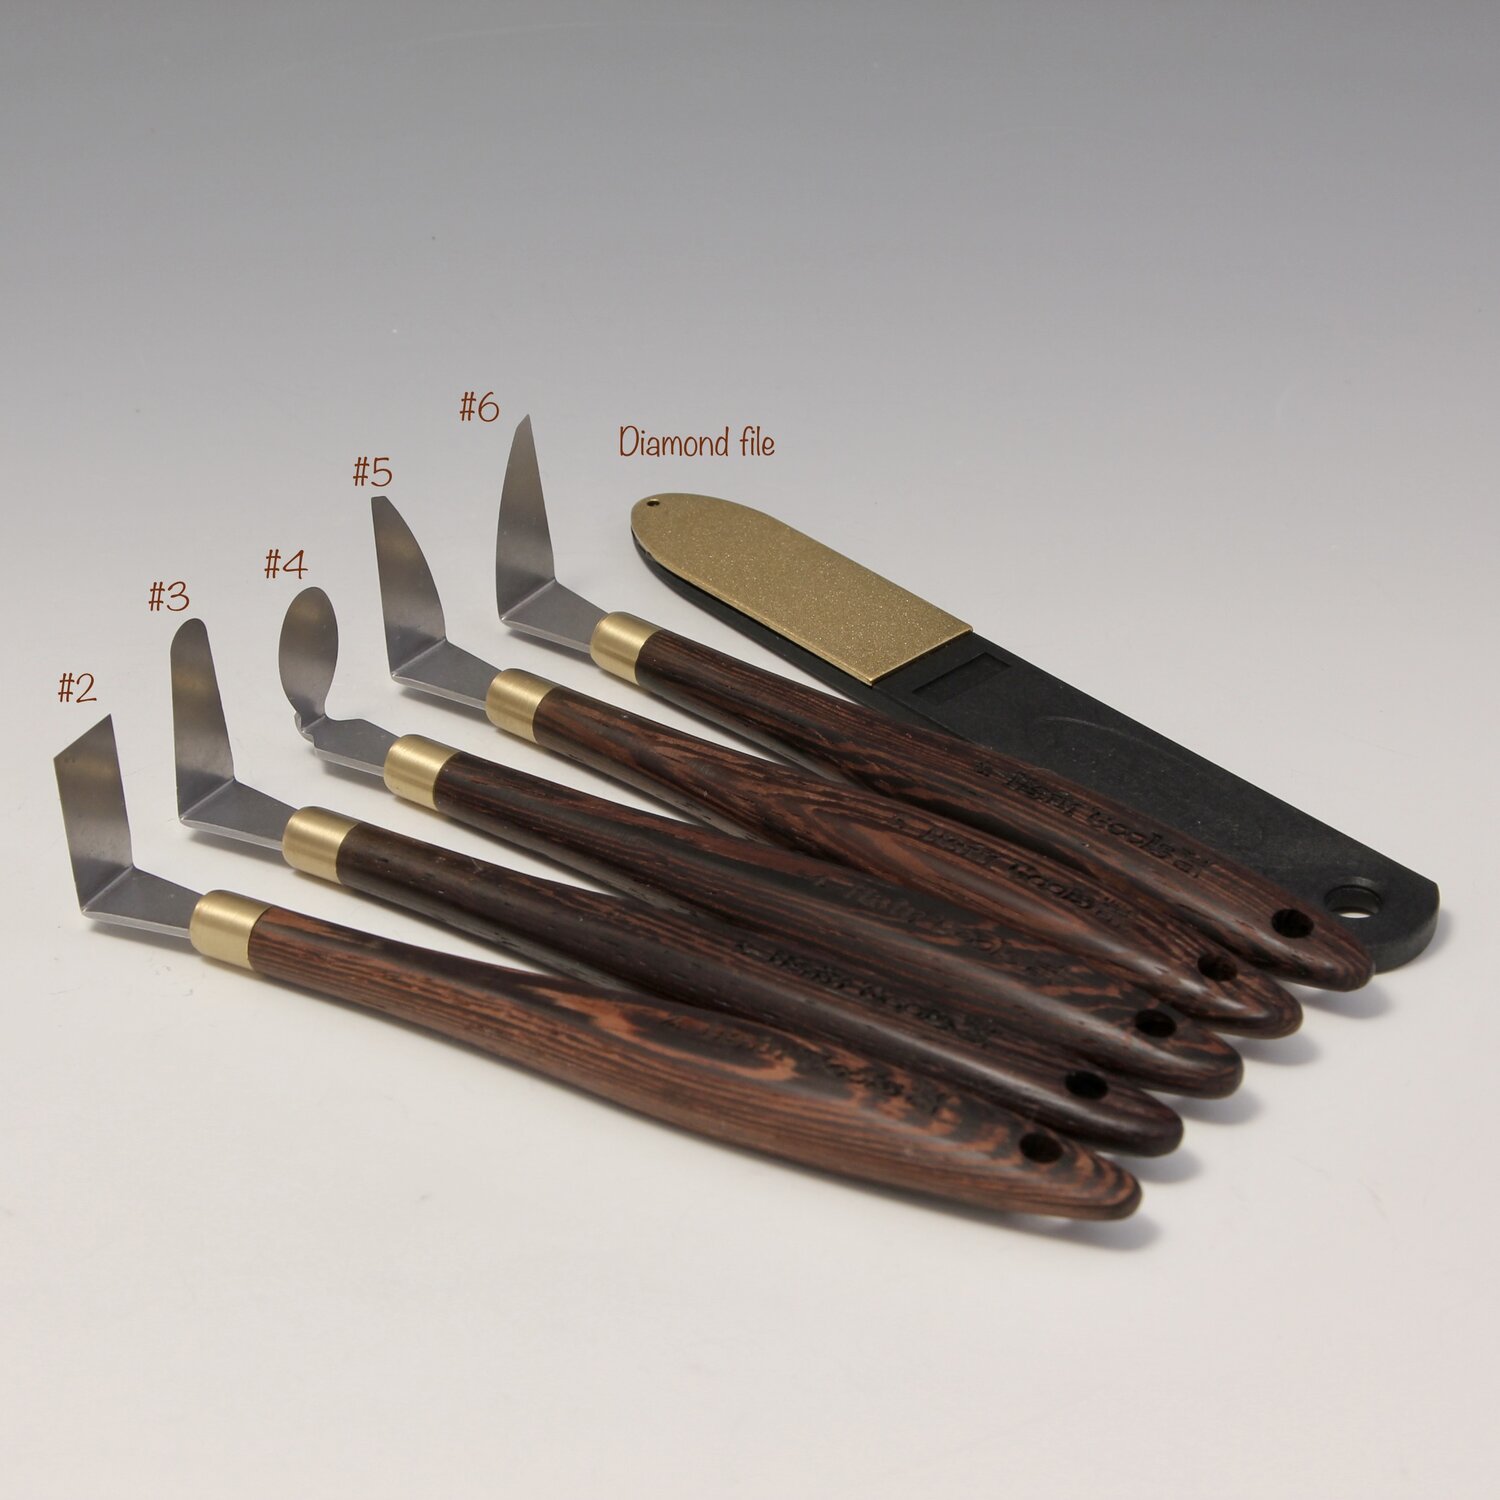 A Set of 7 - The Best Stainless Steel Pottery Trimming / Chattering Tools  (© Copy right #TXu 1-961-453) by Master Potter HsinChuen Lin 林新春 —  Hsin-Chuen Lin Ceramics & Tools